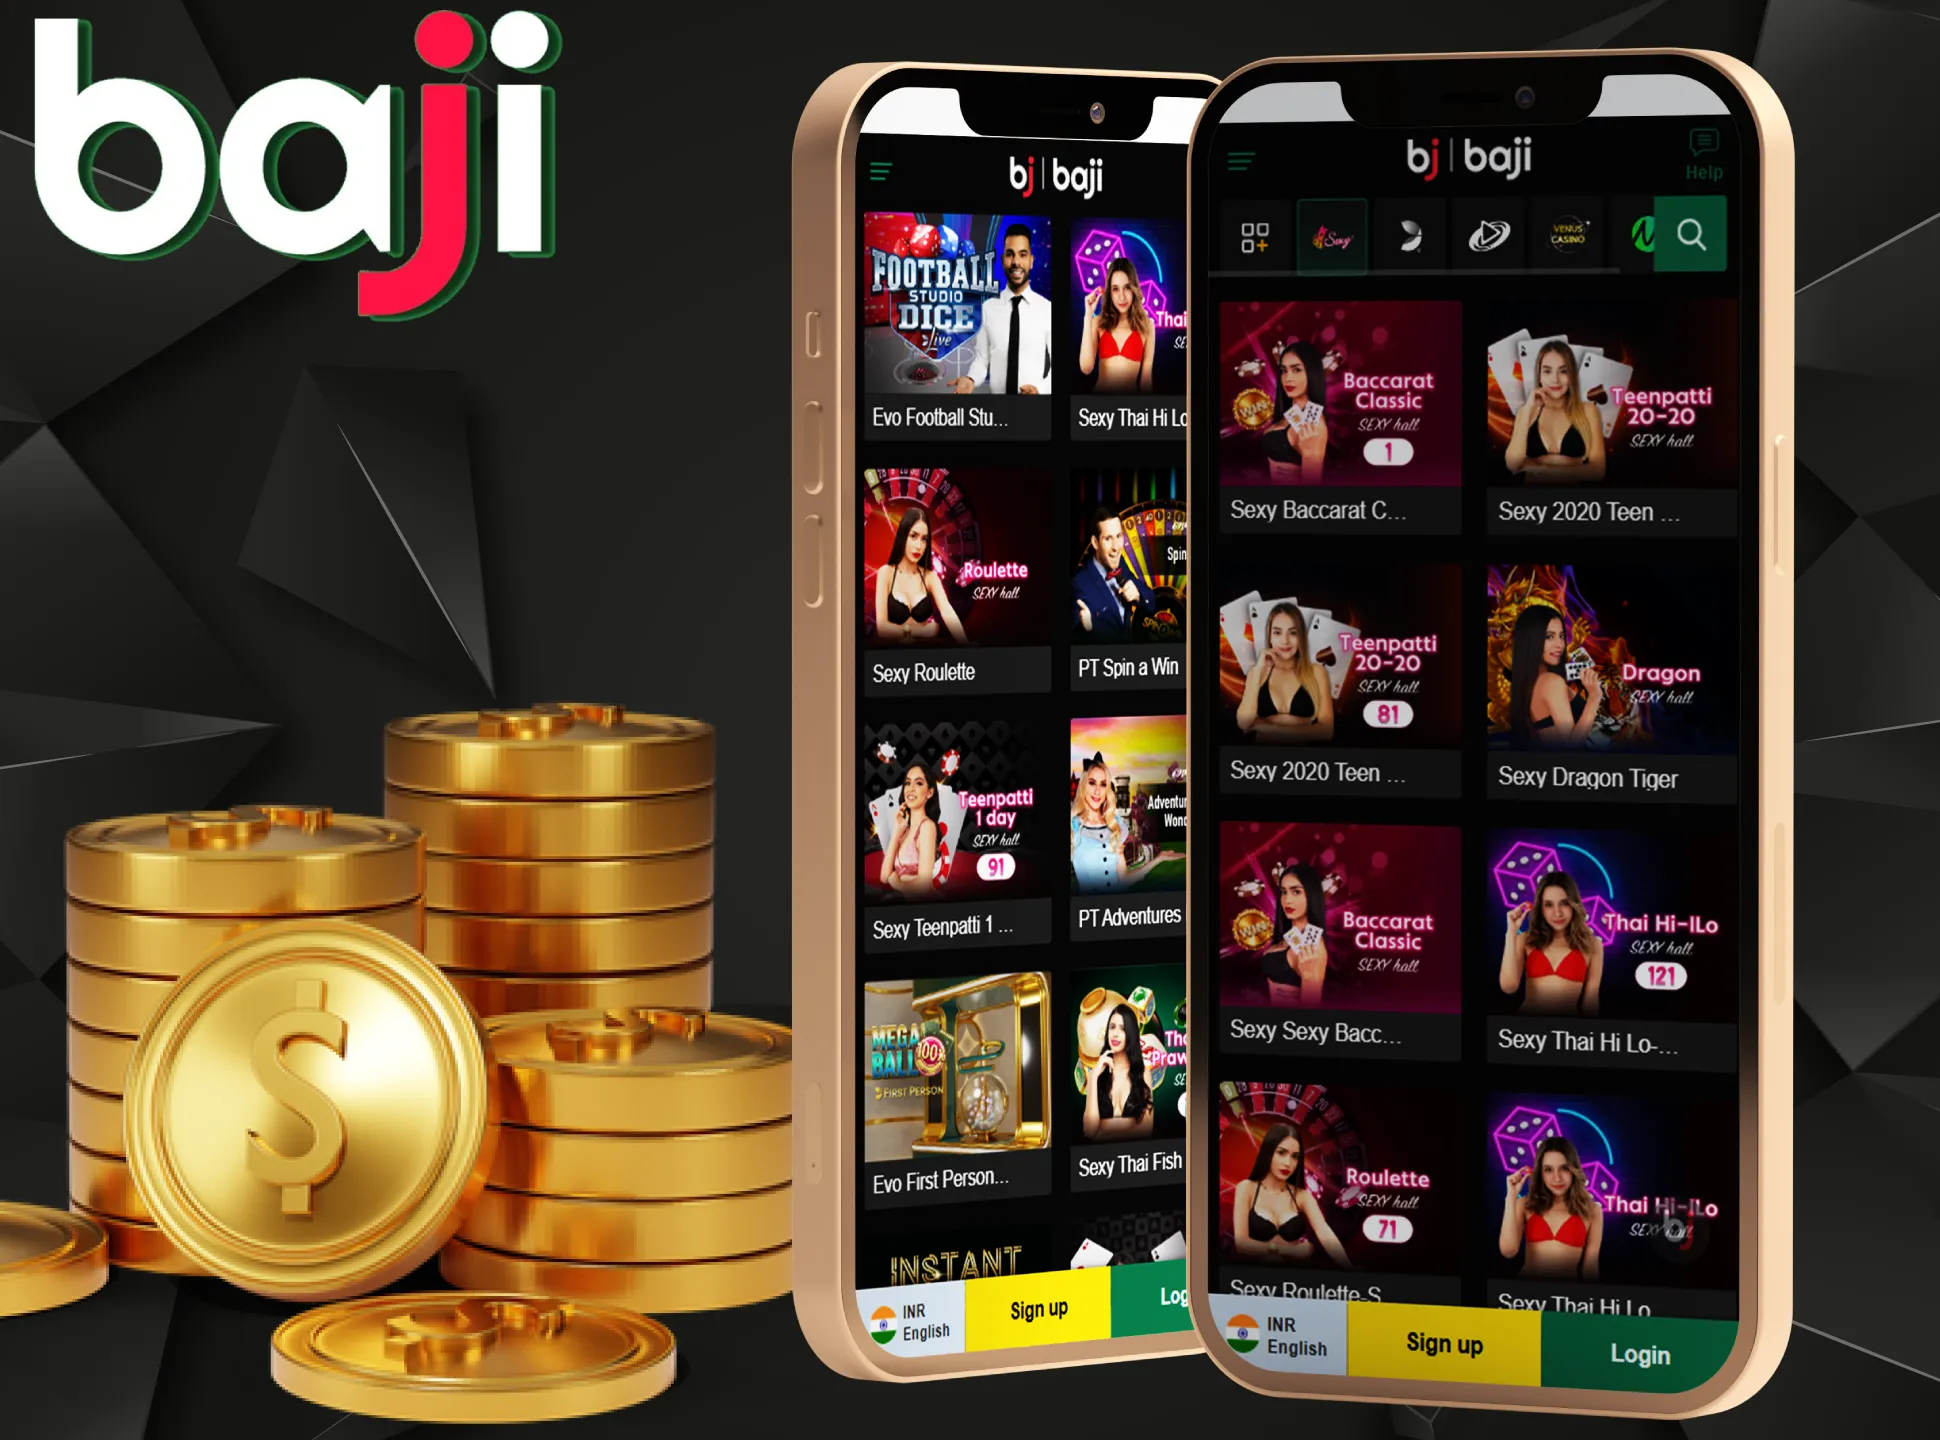 We can truly advice you to use Baji app for betting and casino gaming.